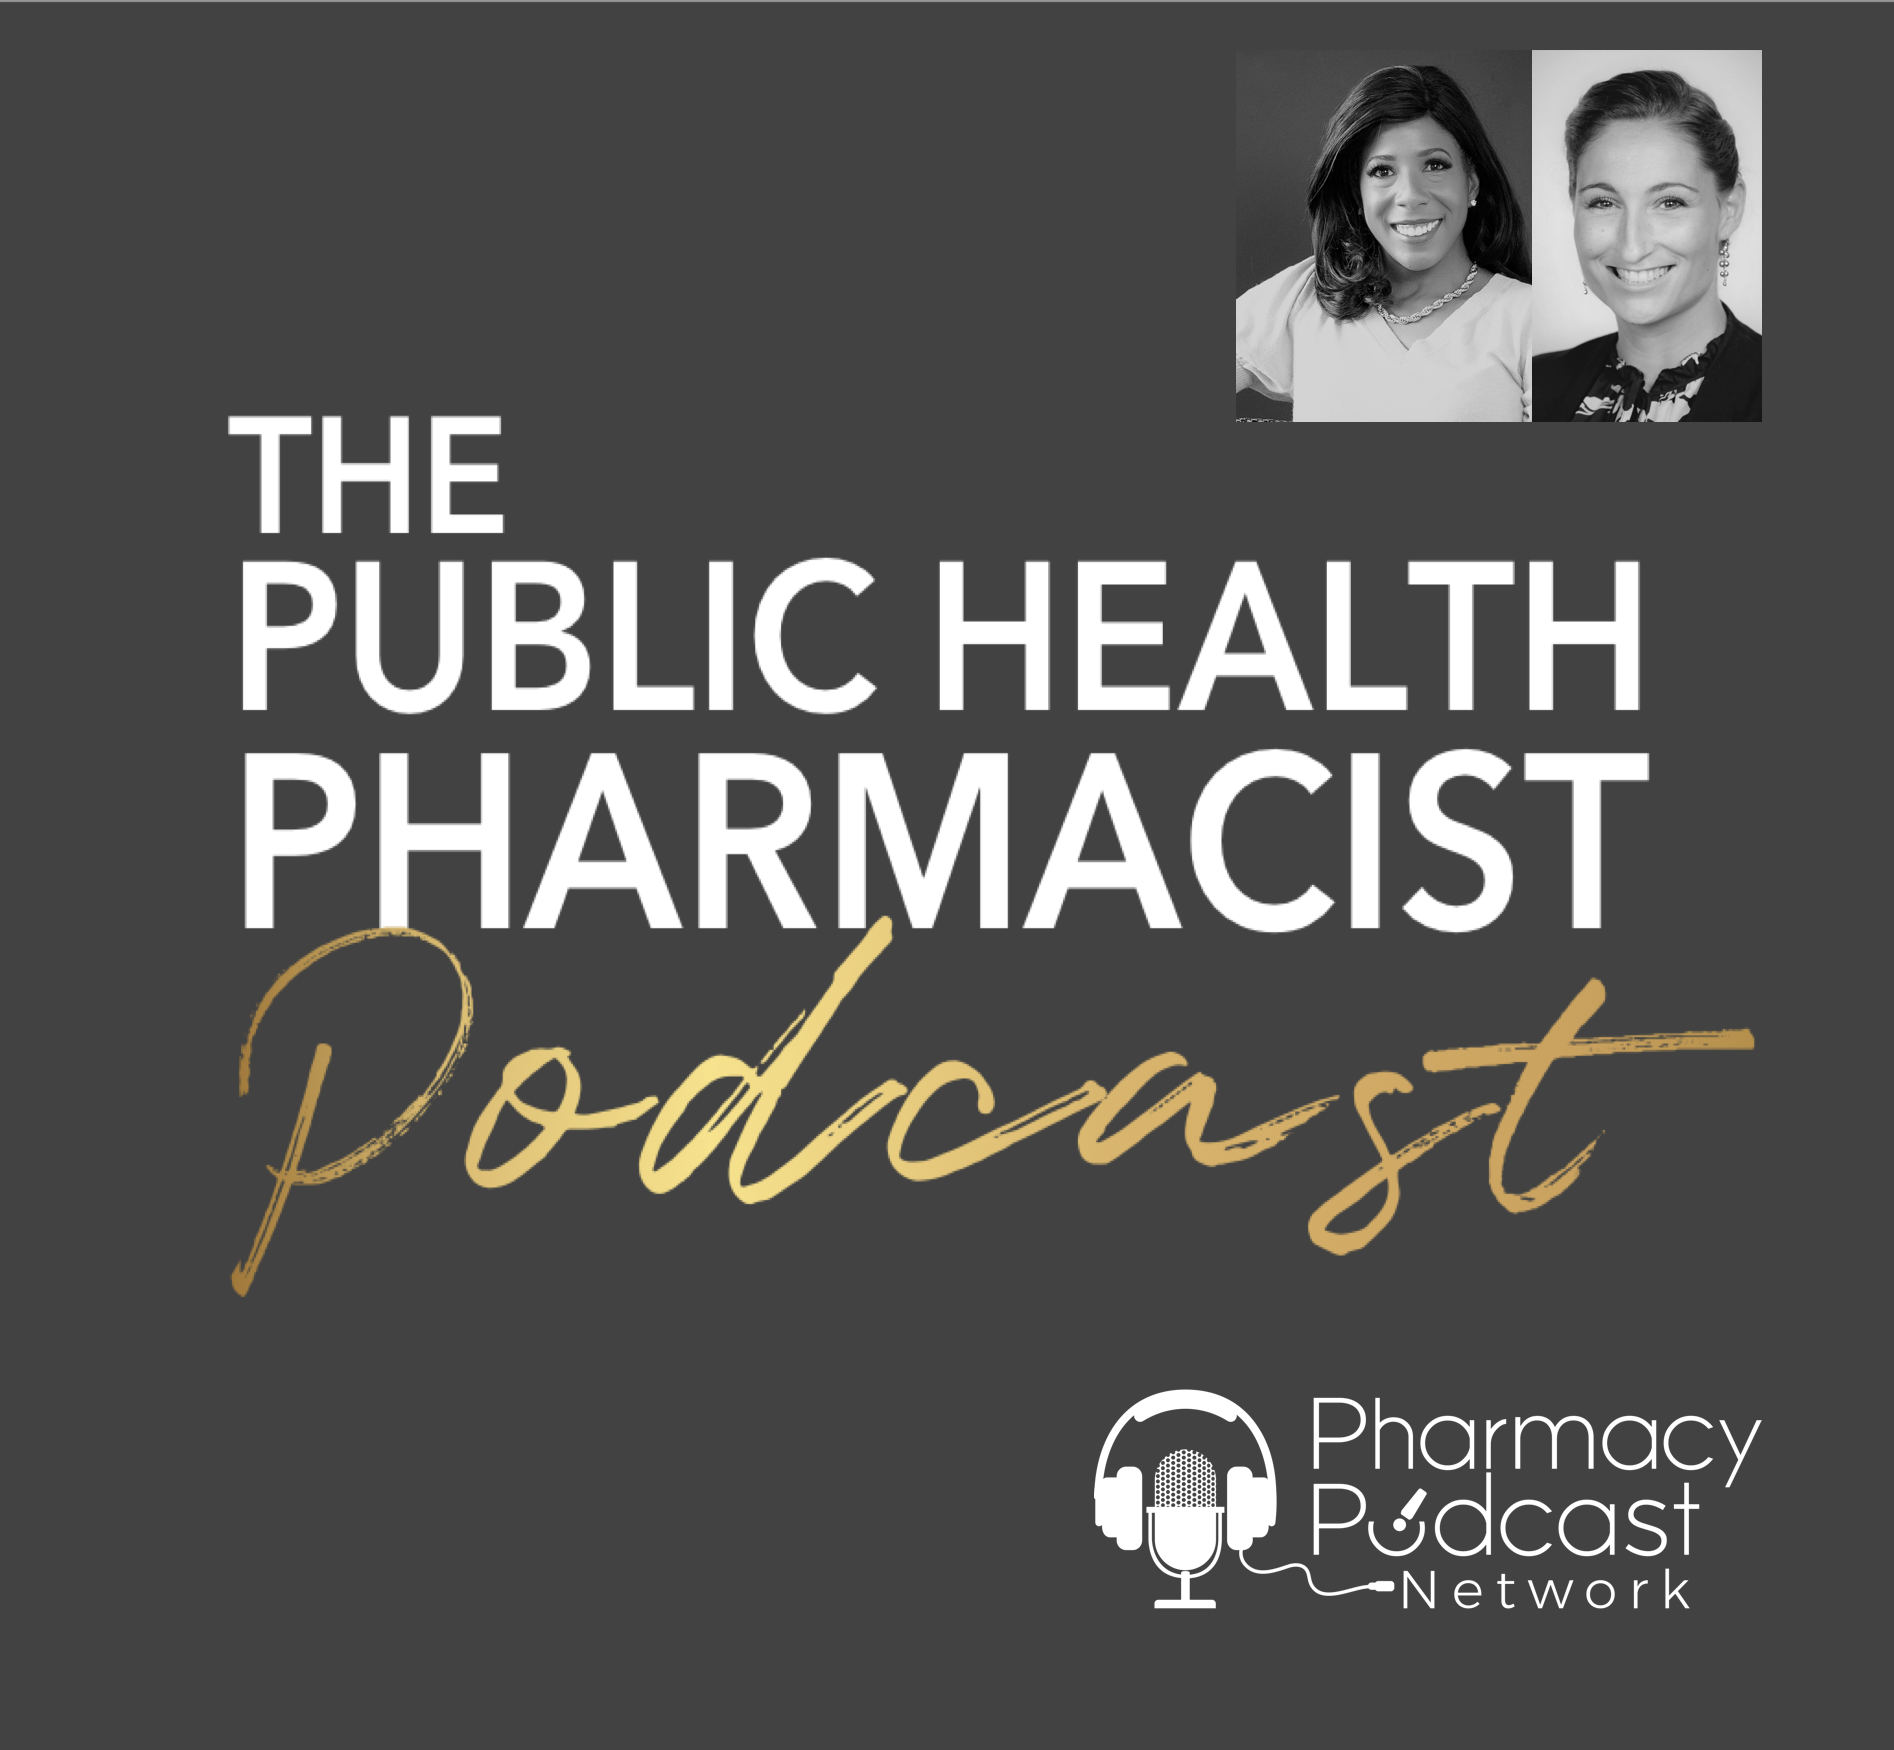 Unique Partnerships in Pharmacy - Why Paramedicine Could Help Access to Care for the Underserved and Advance Public Health Initiatives  | Public Health Pharmacist